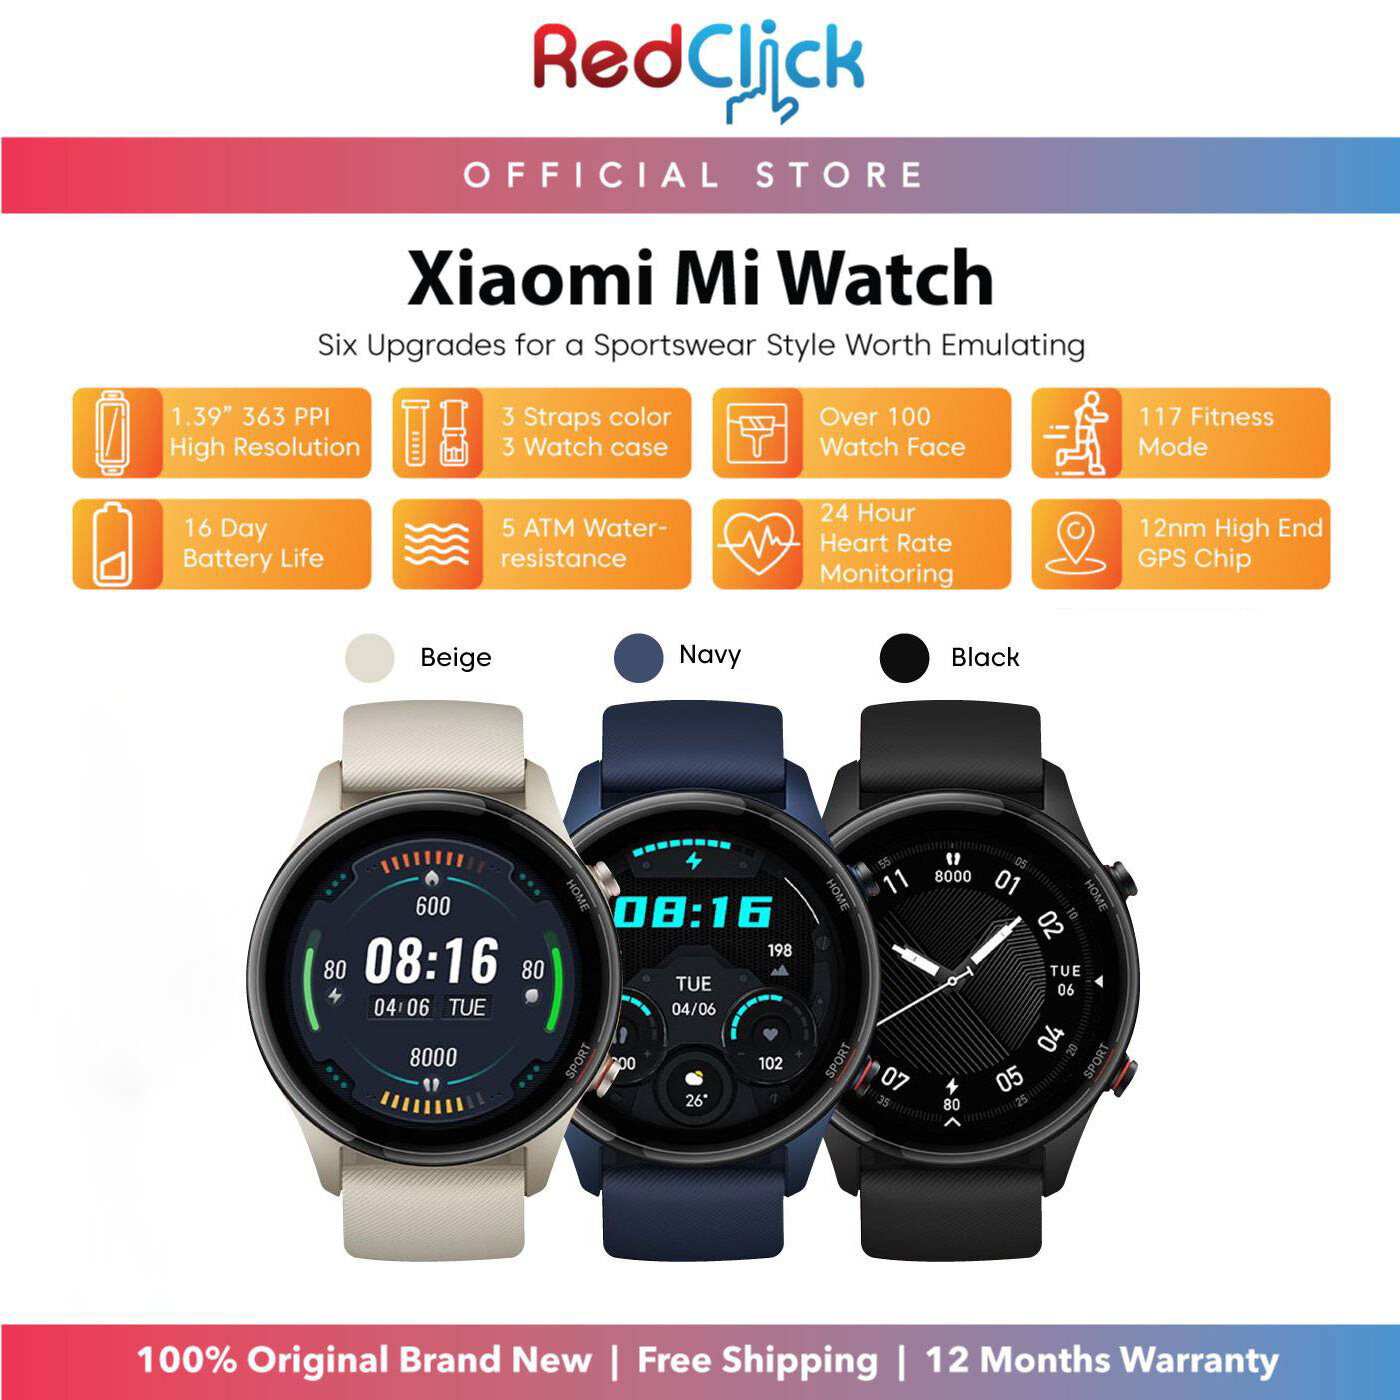 Xiaomi Mi Watch (XMWTCL02) 1.39" AMOLED Support 117 Sport Mode 16 Days Battery Life Support Blood Oxygen Testing Original Xiaomi Product